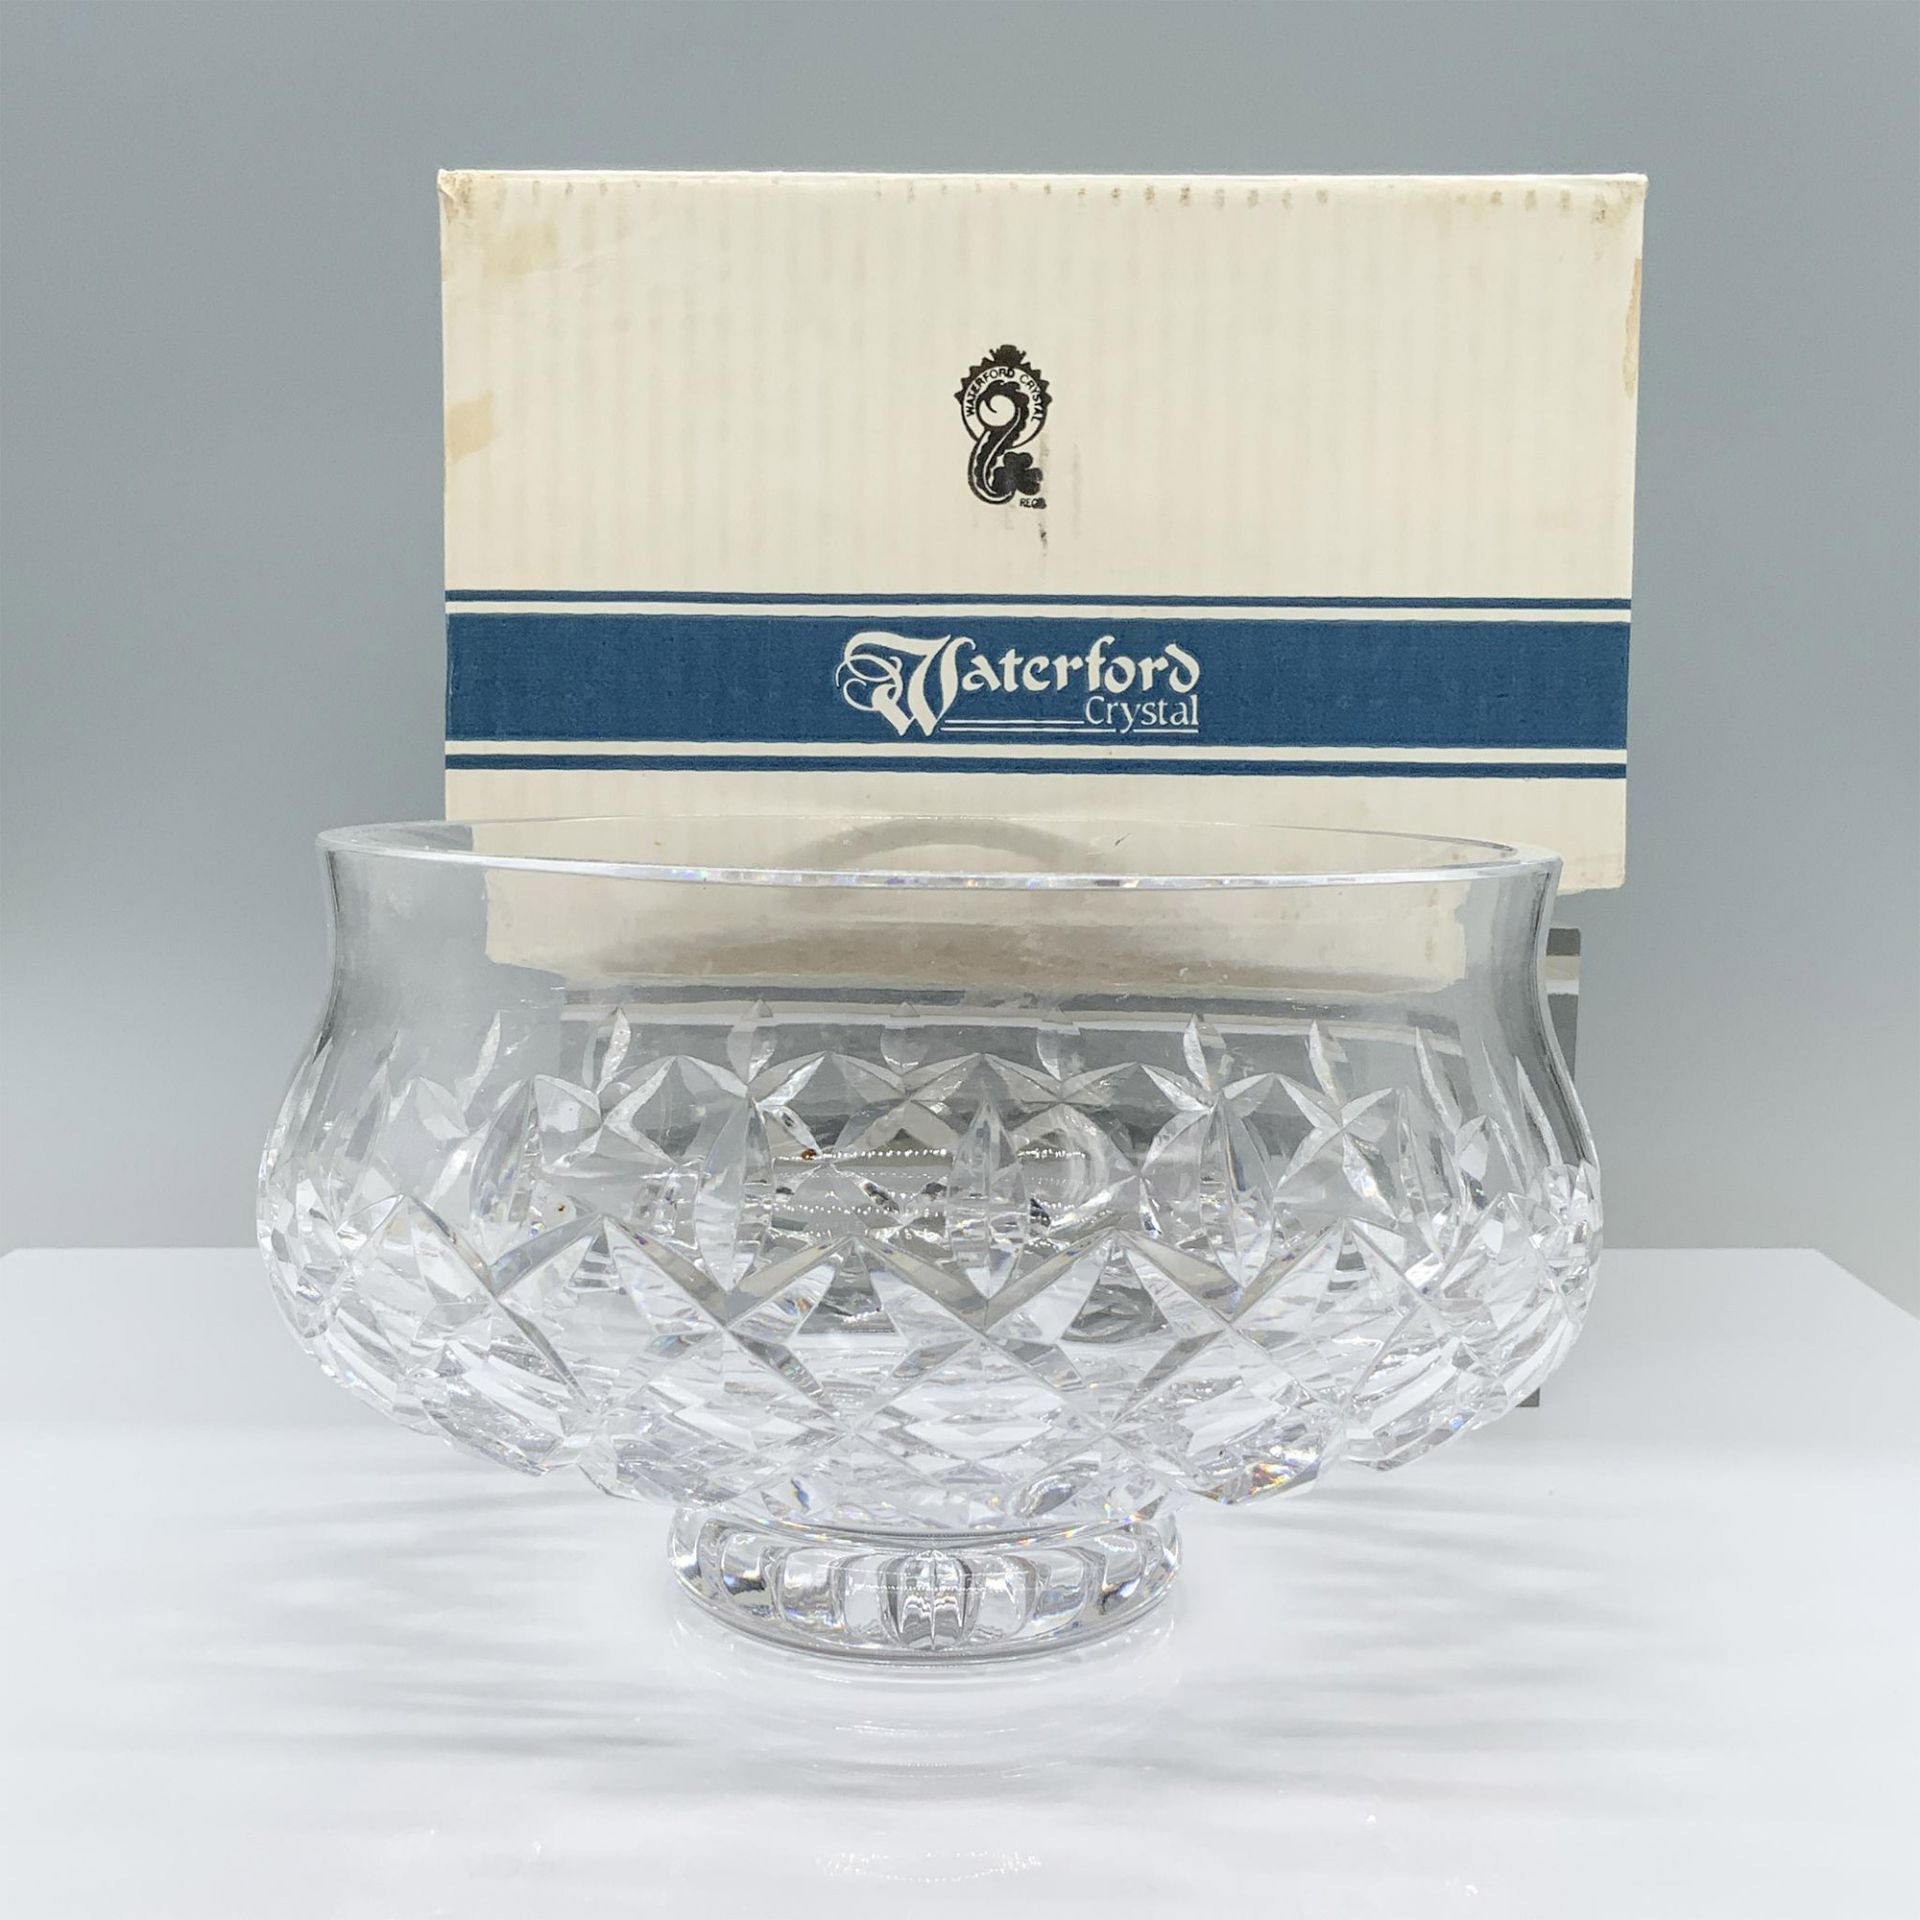 Waterford Crystal Footed Bowl, Lismore - Image 4 of 4